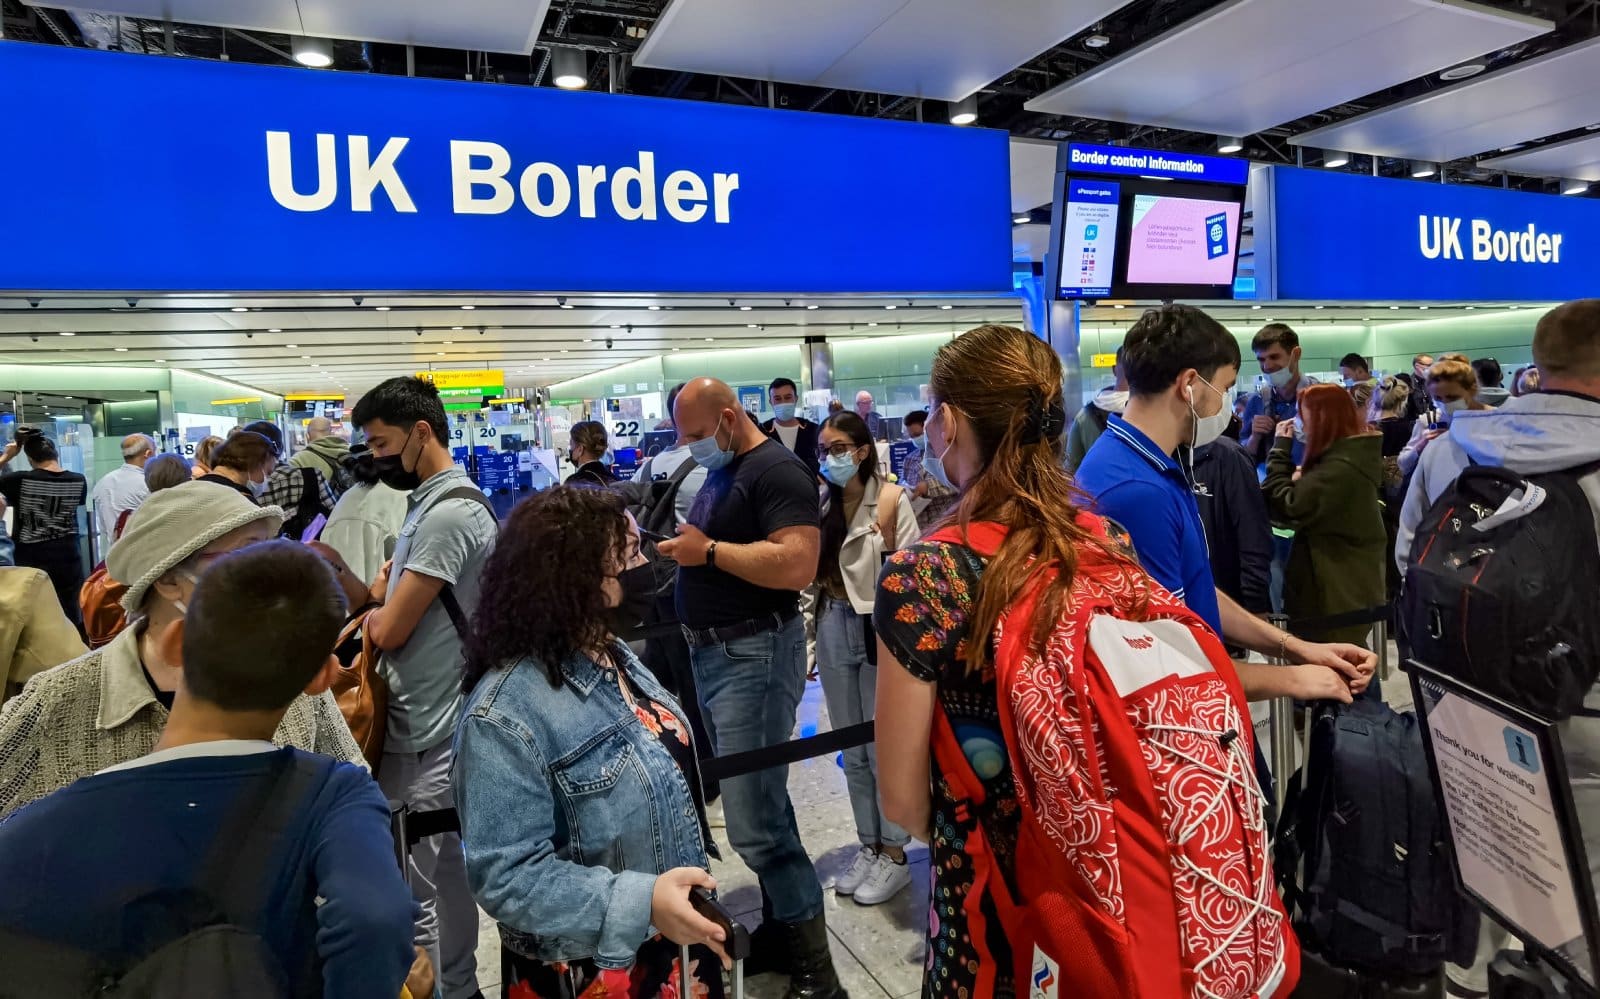 Image Credit: Shutterstock / Brookgardener <p>Since Brexit, these regulations have become mandatory and many Brits are not in the know which will result in a rude awakening upon their holiday departure.</p>